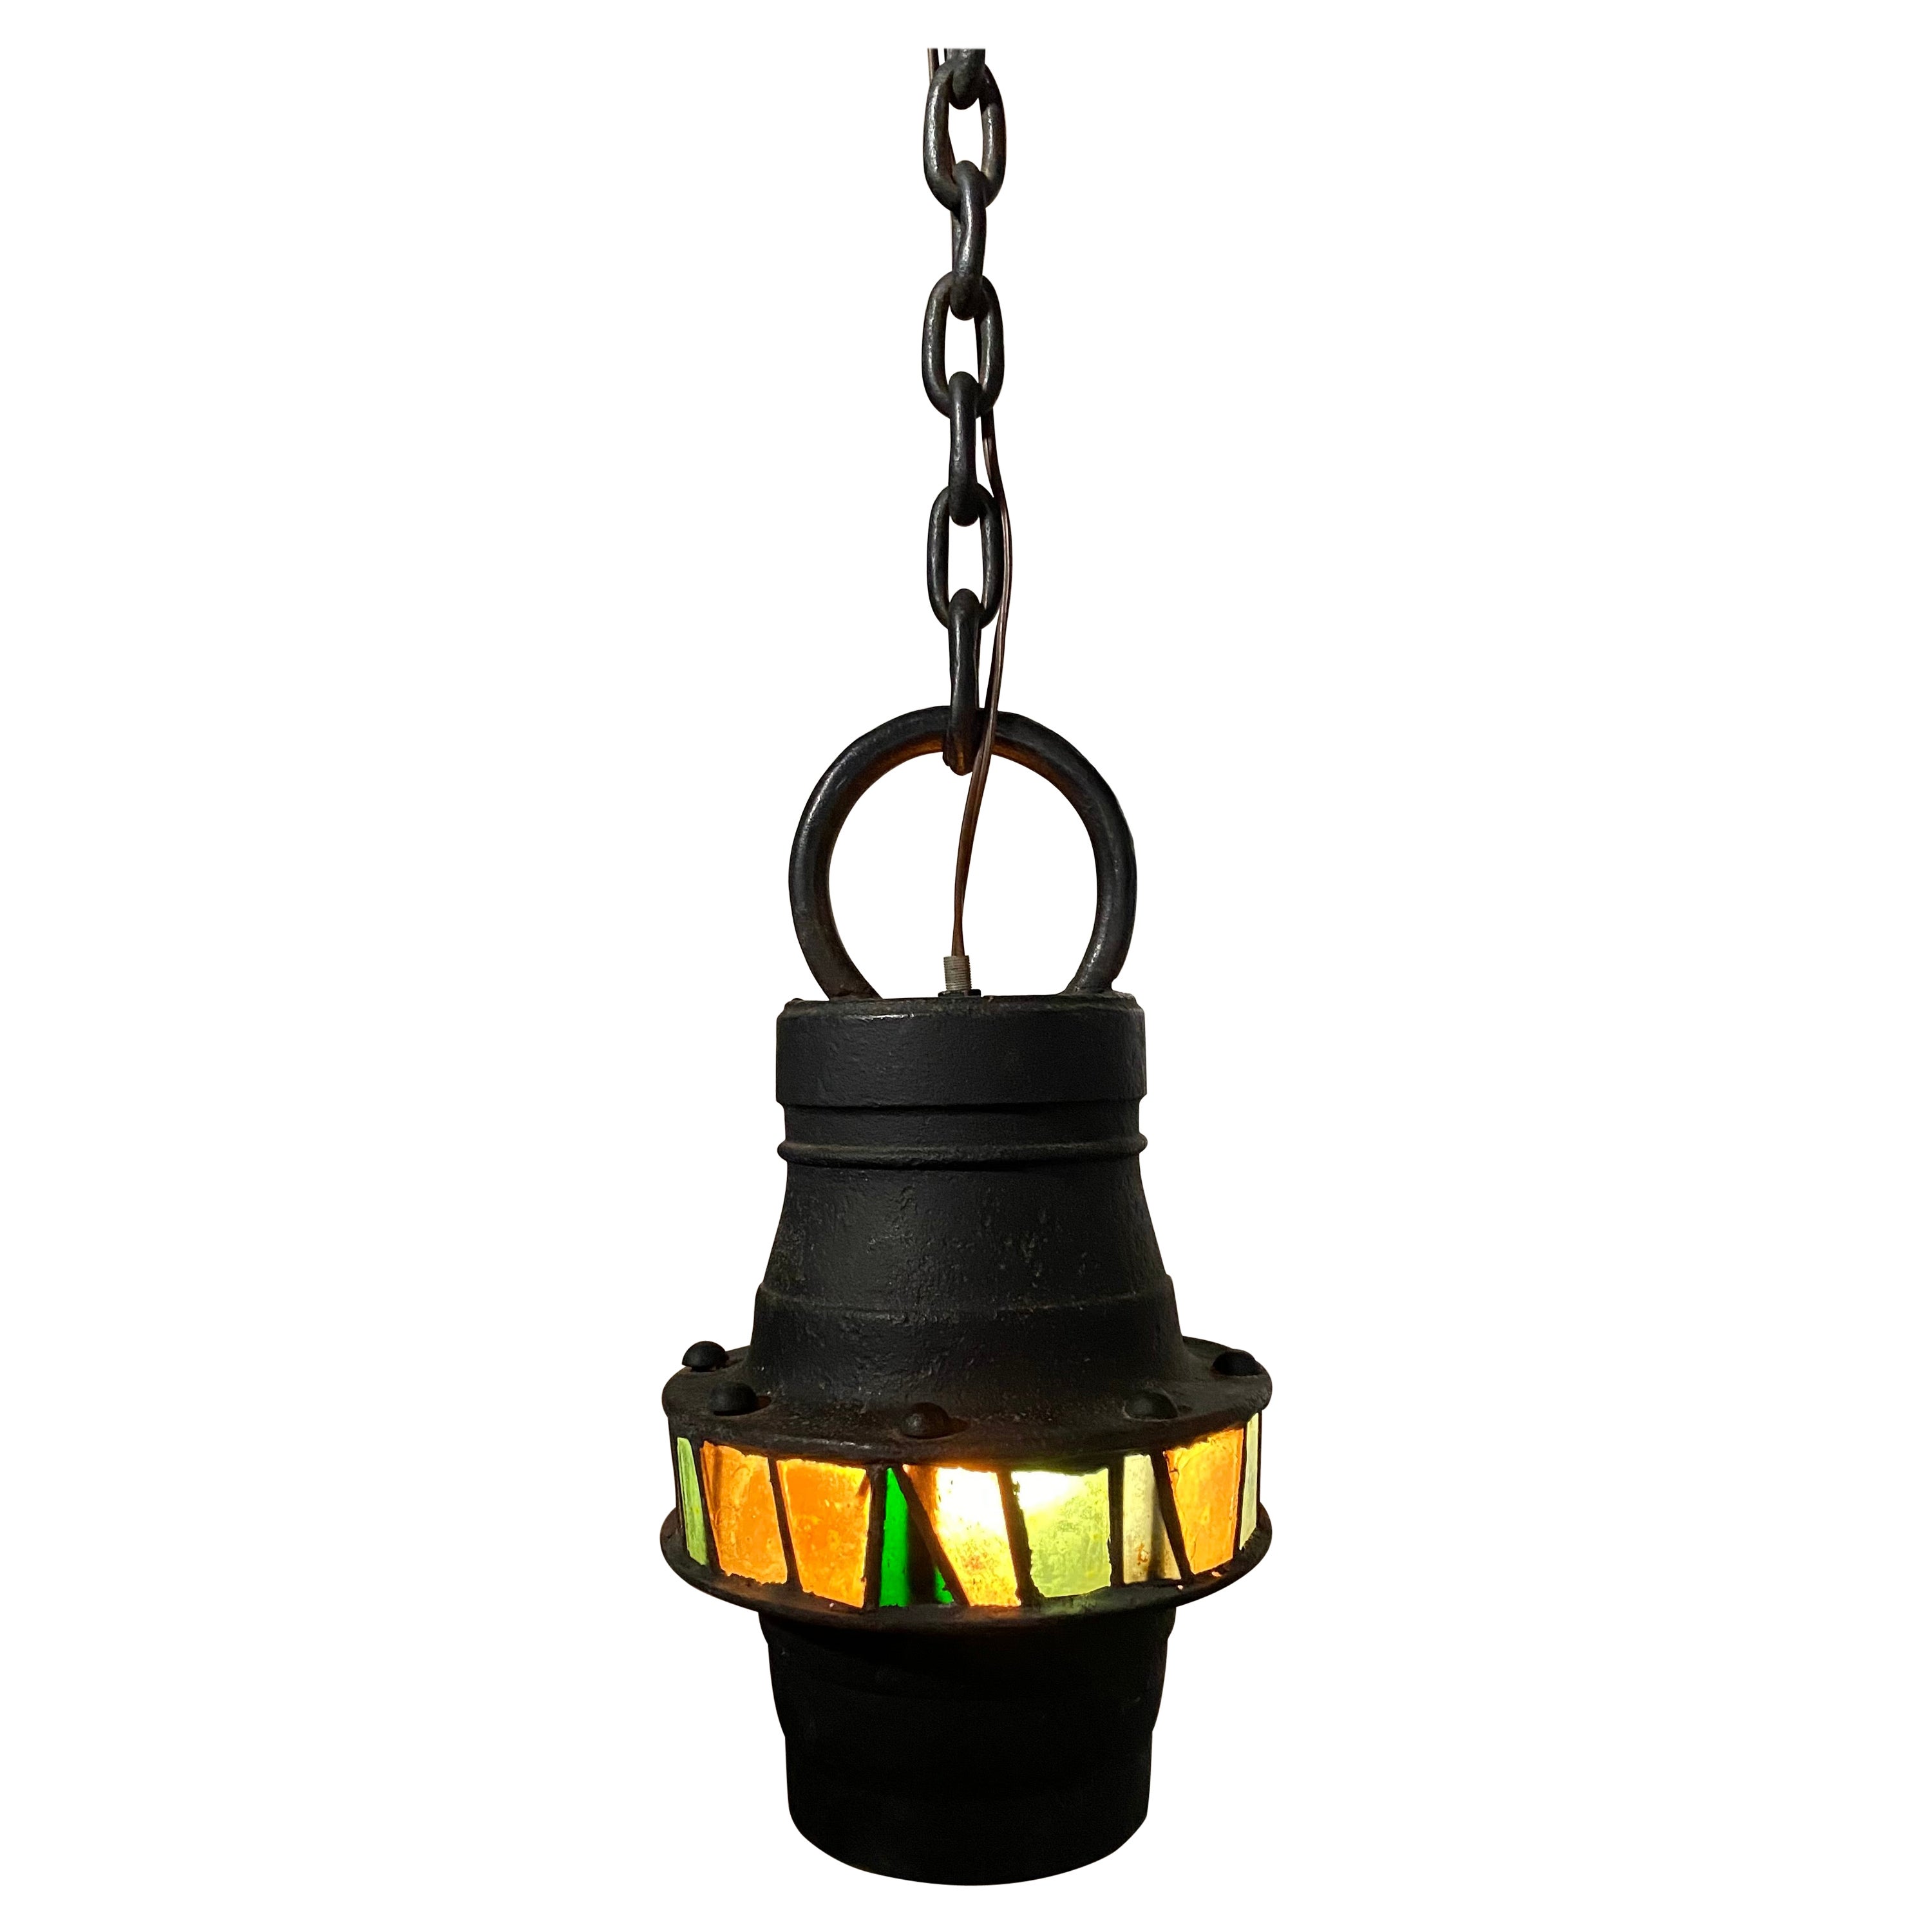 Brutalist Hand-Crafted Iron and stained Glass Hanging Pendant Lamp, c. 1960's